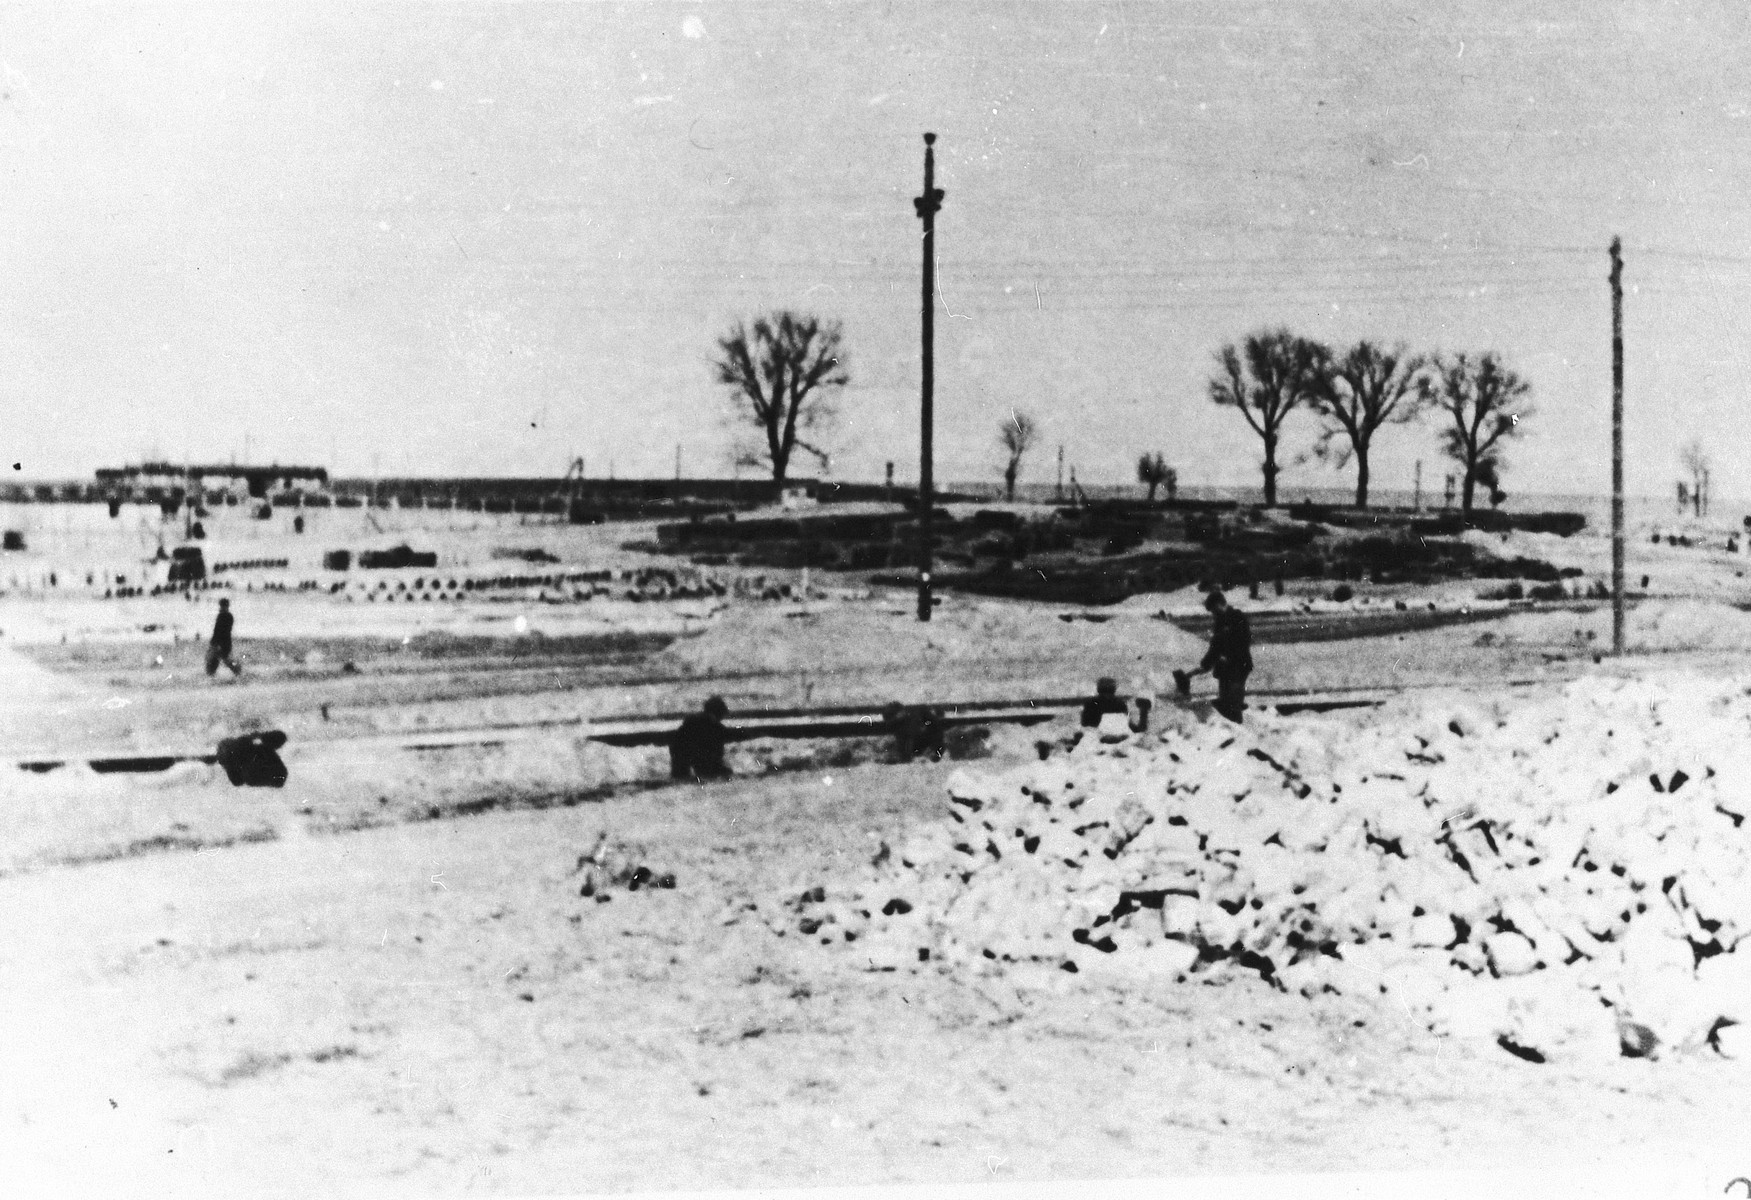 Prisoners at work in the Majdanek concentration camp outside Lublin.